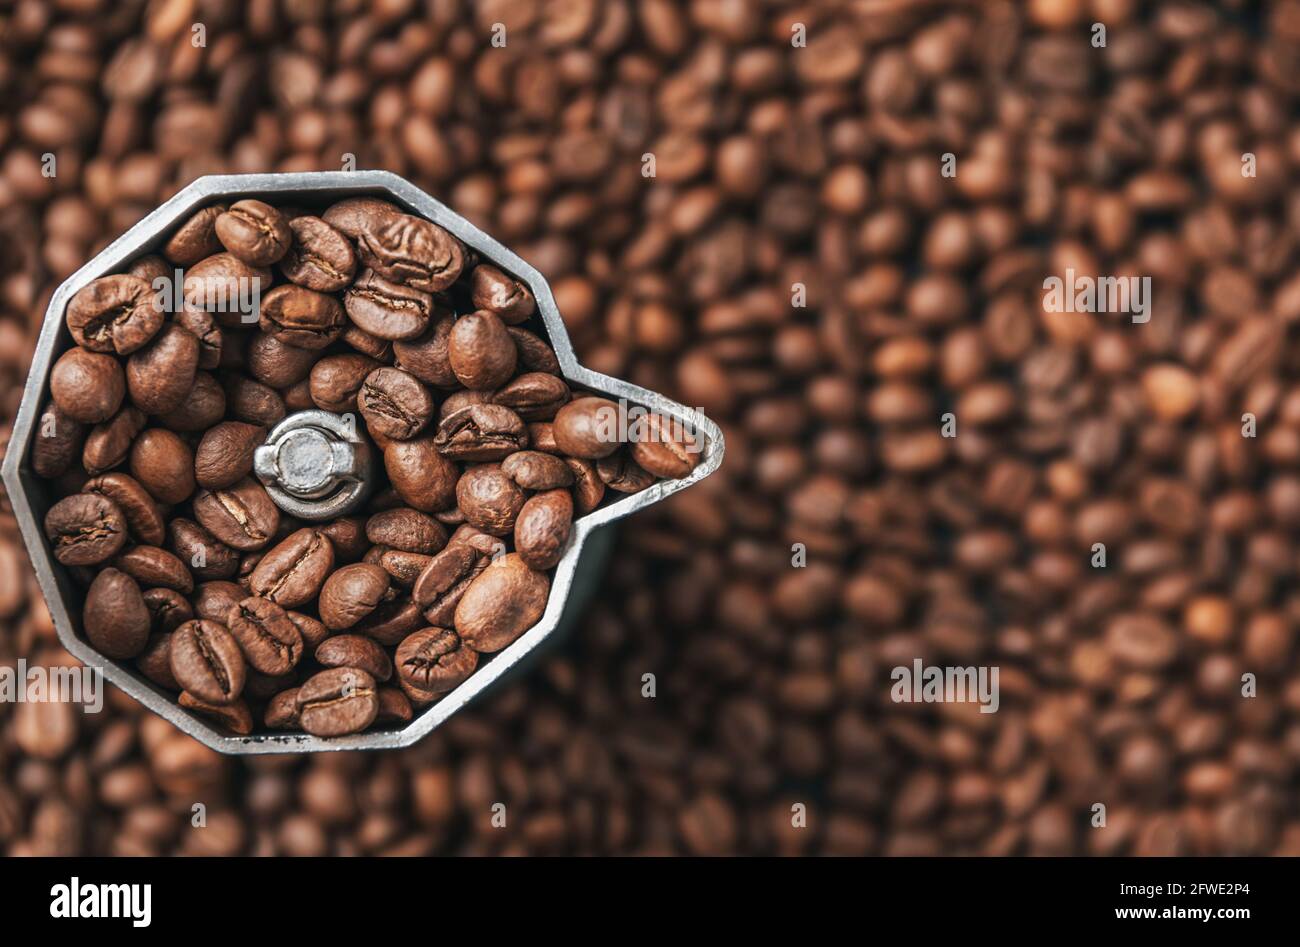 Top view on mocha pot full with coffee beans. Coffee background concept. Stock Photo